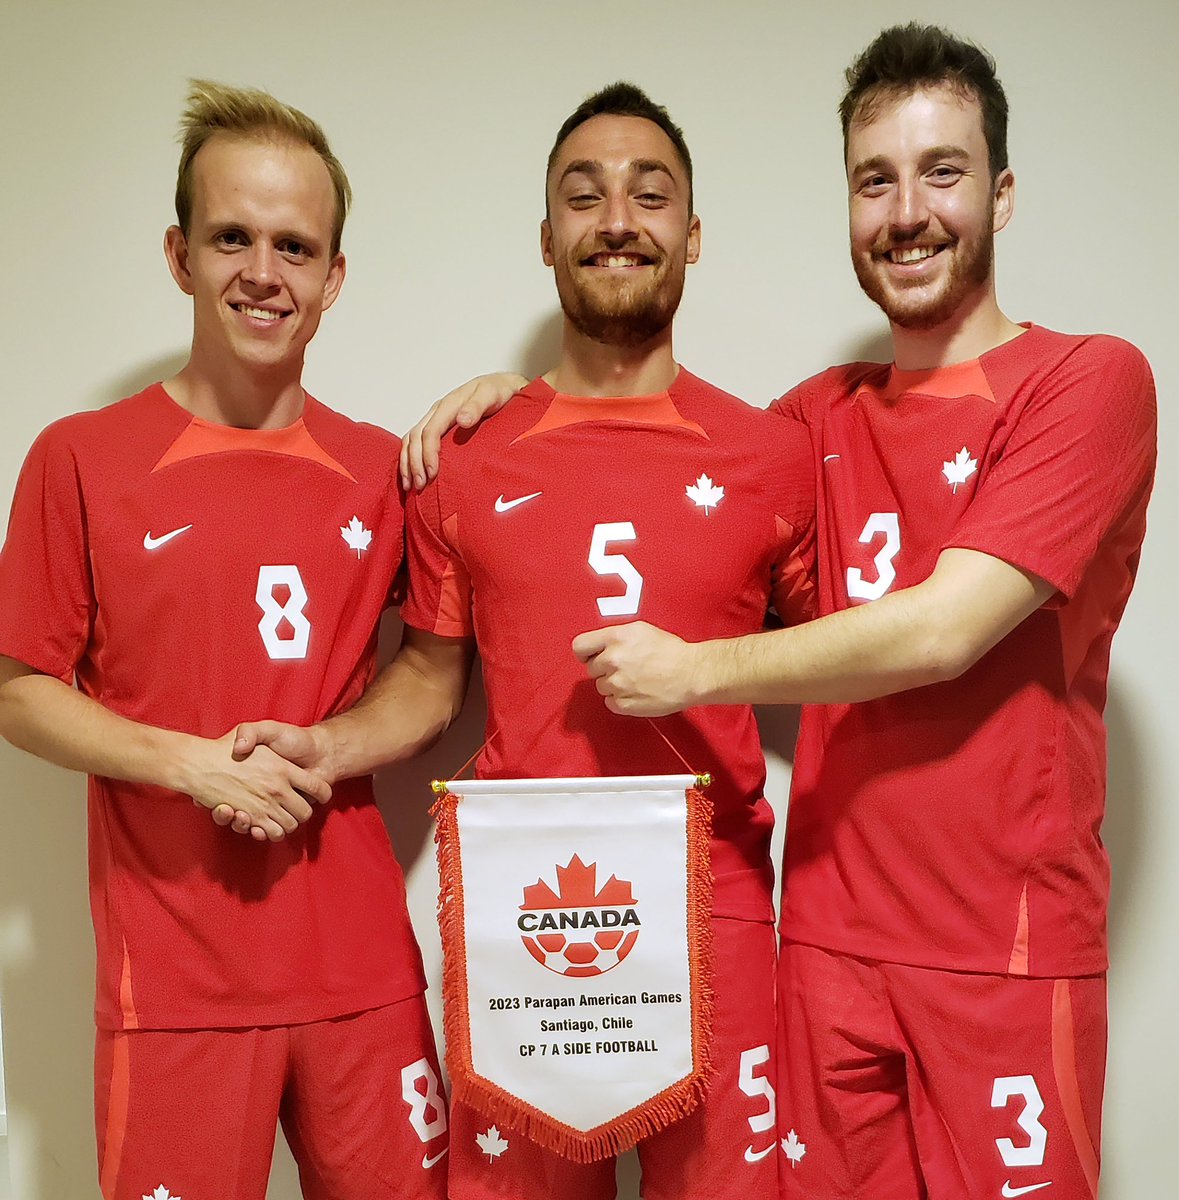 Congratulations to #canPara’s Samuel Charron who scored his 50th international goal last night! 🇨🇦 #canPara play their 3rd match today at the 2023 Parapan Am Games against the host Chile at 3PM ET / 12PM PT.